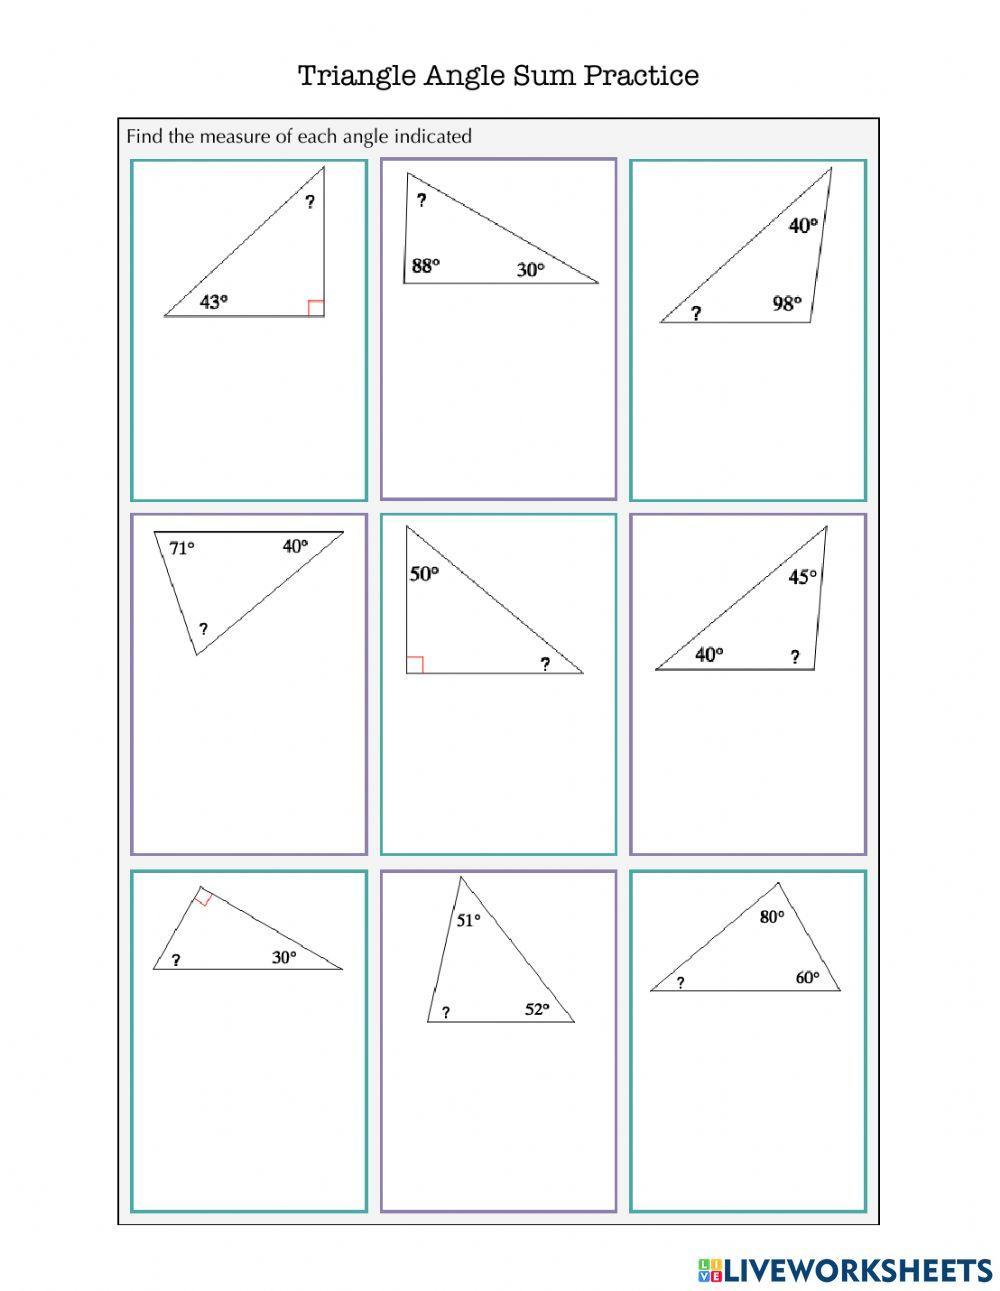 Find angles in triangles (practice)